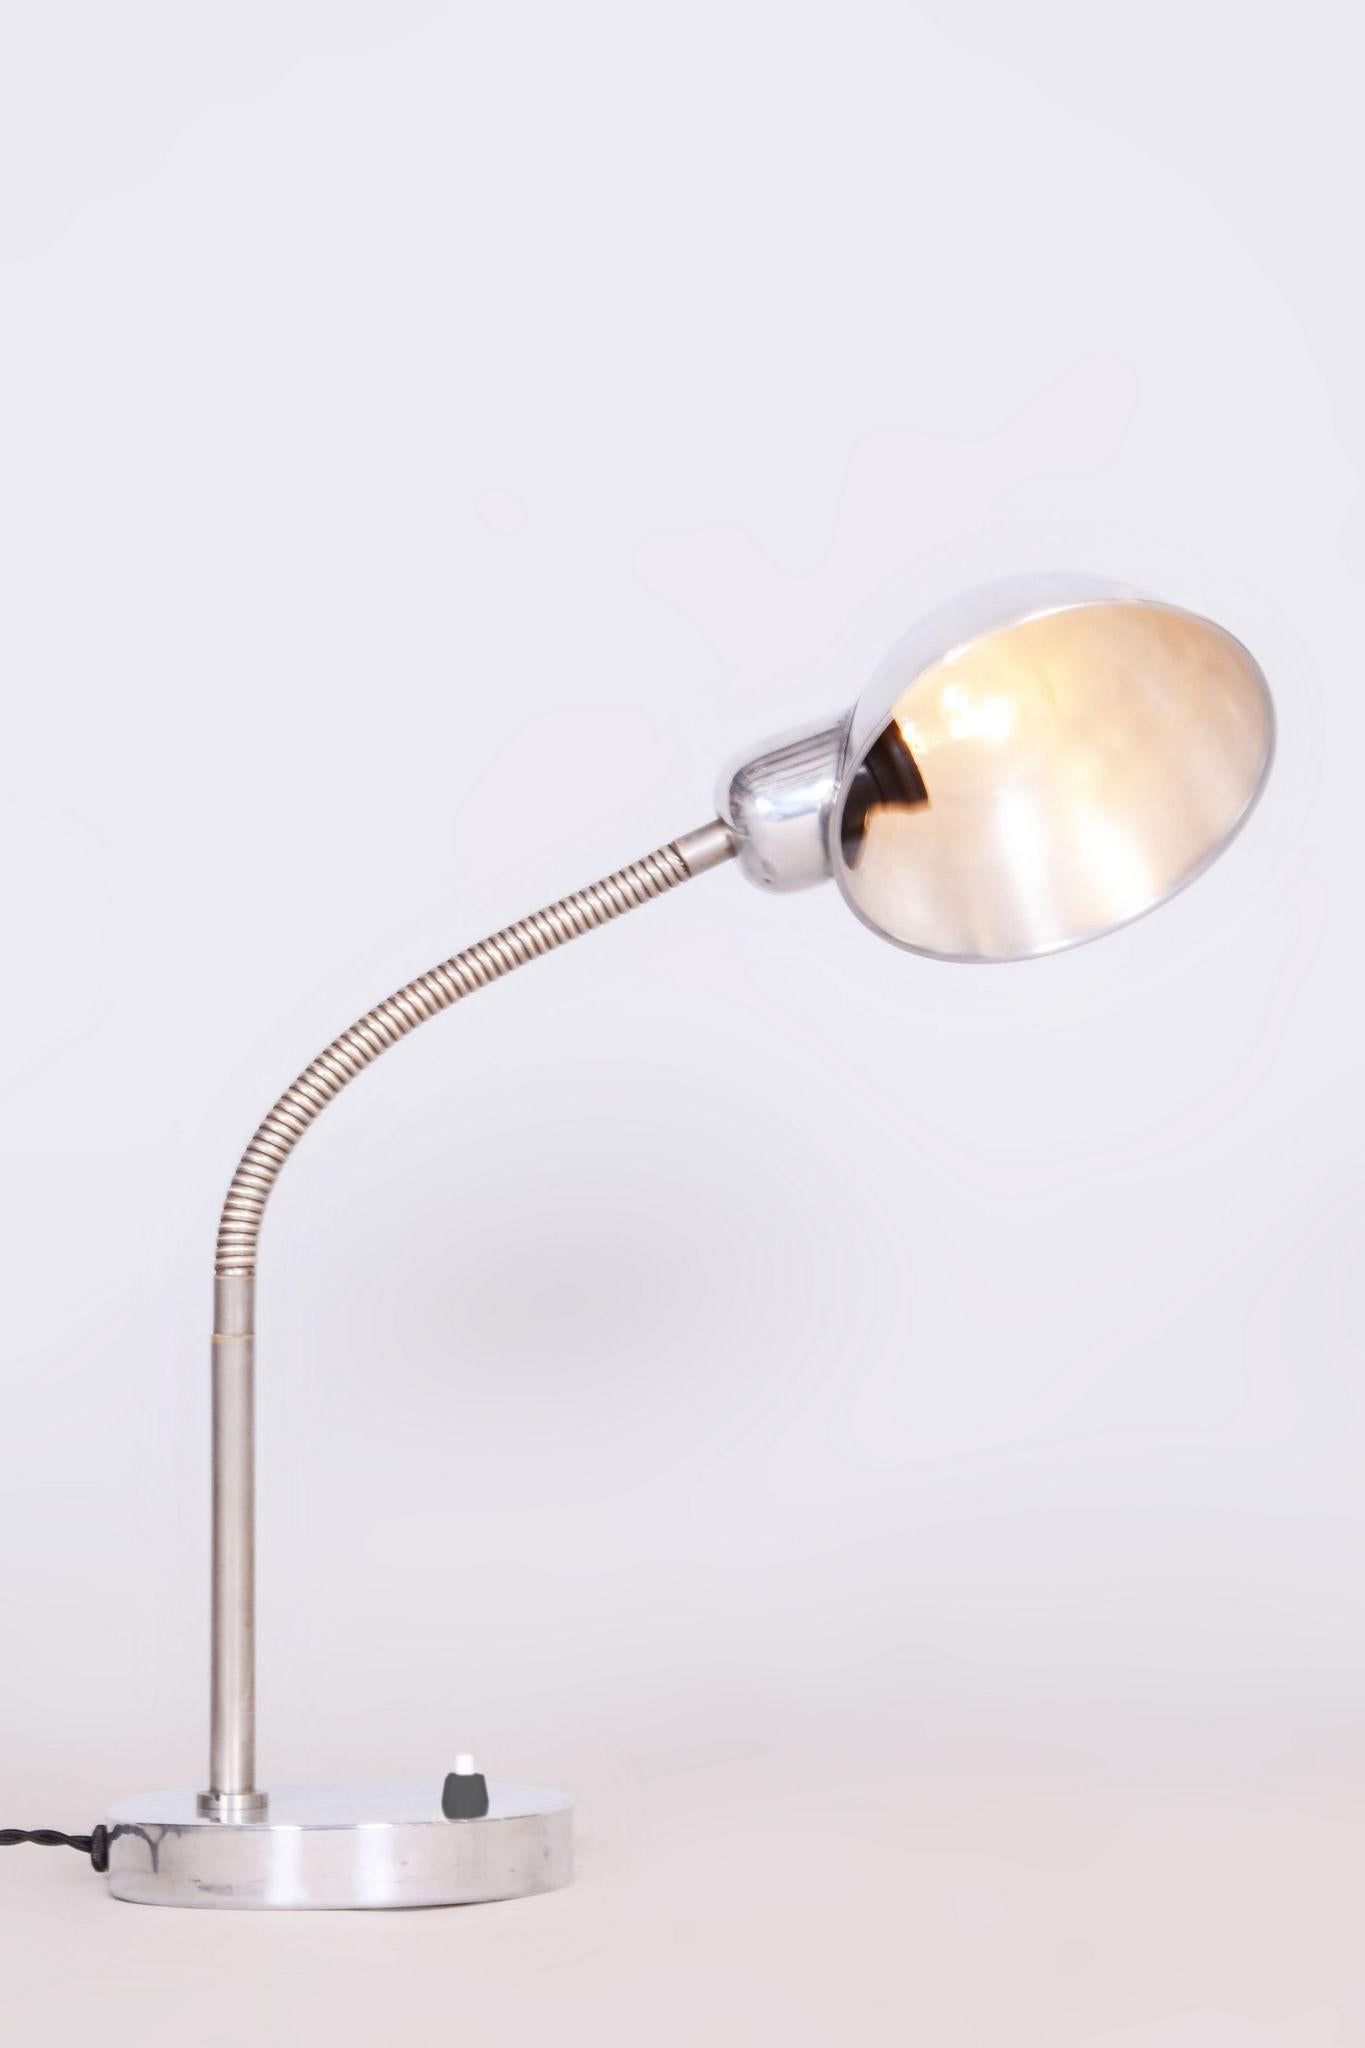 Mid-20th Century Restored Bauhaus Table Lamp, New Electrification, Chrome, Czech, 1930s For Sale